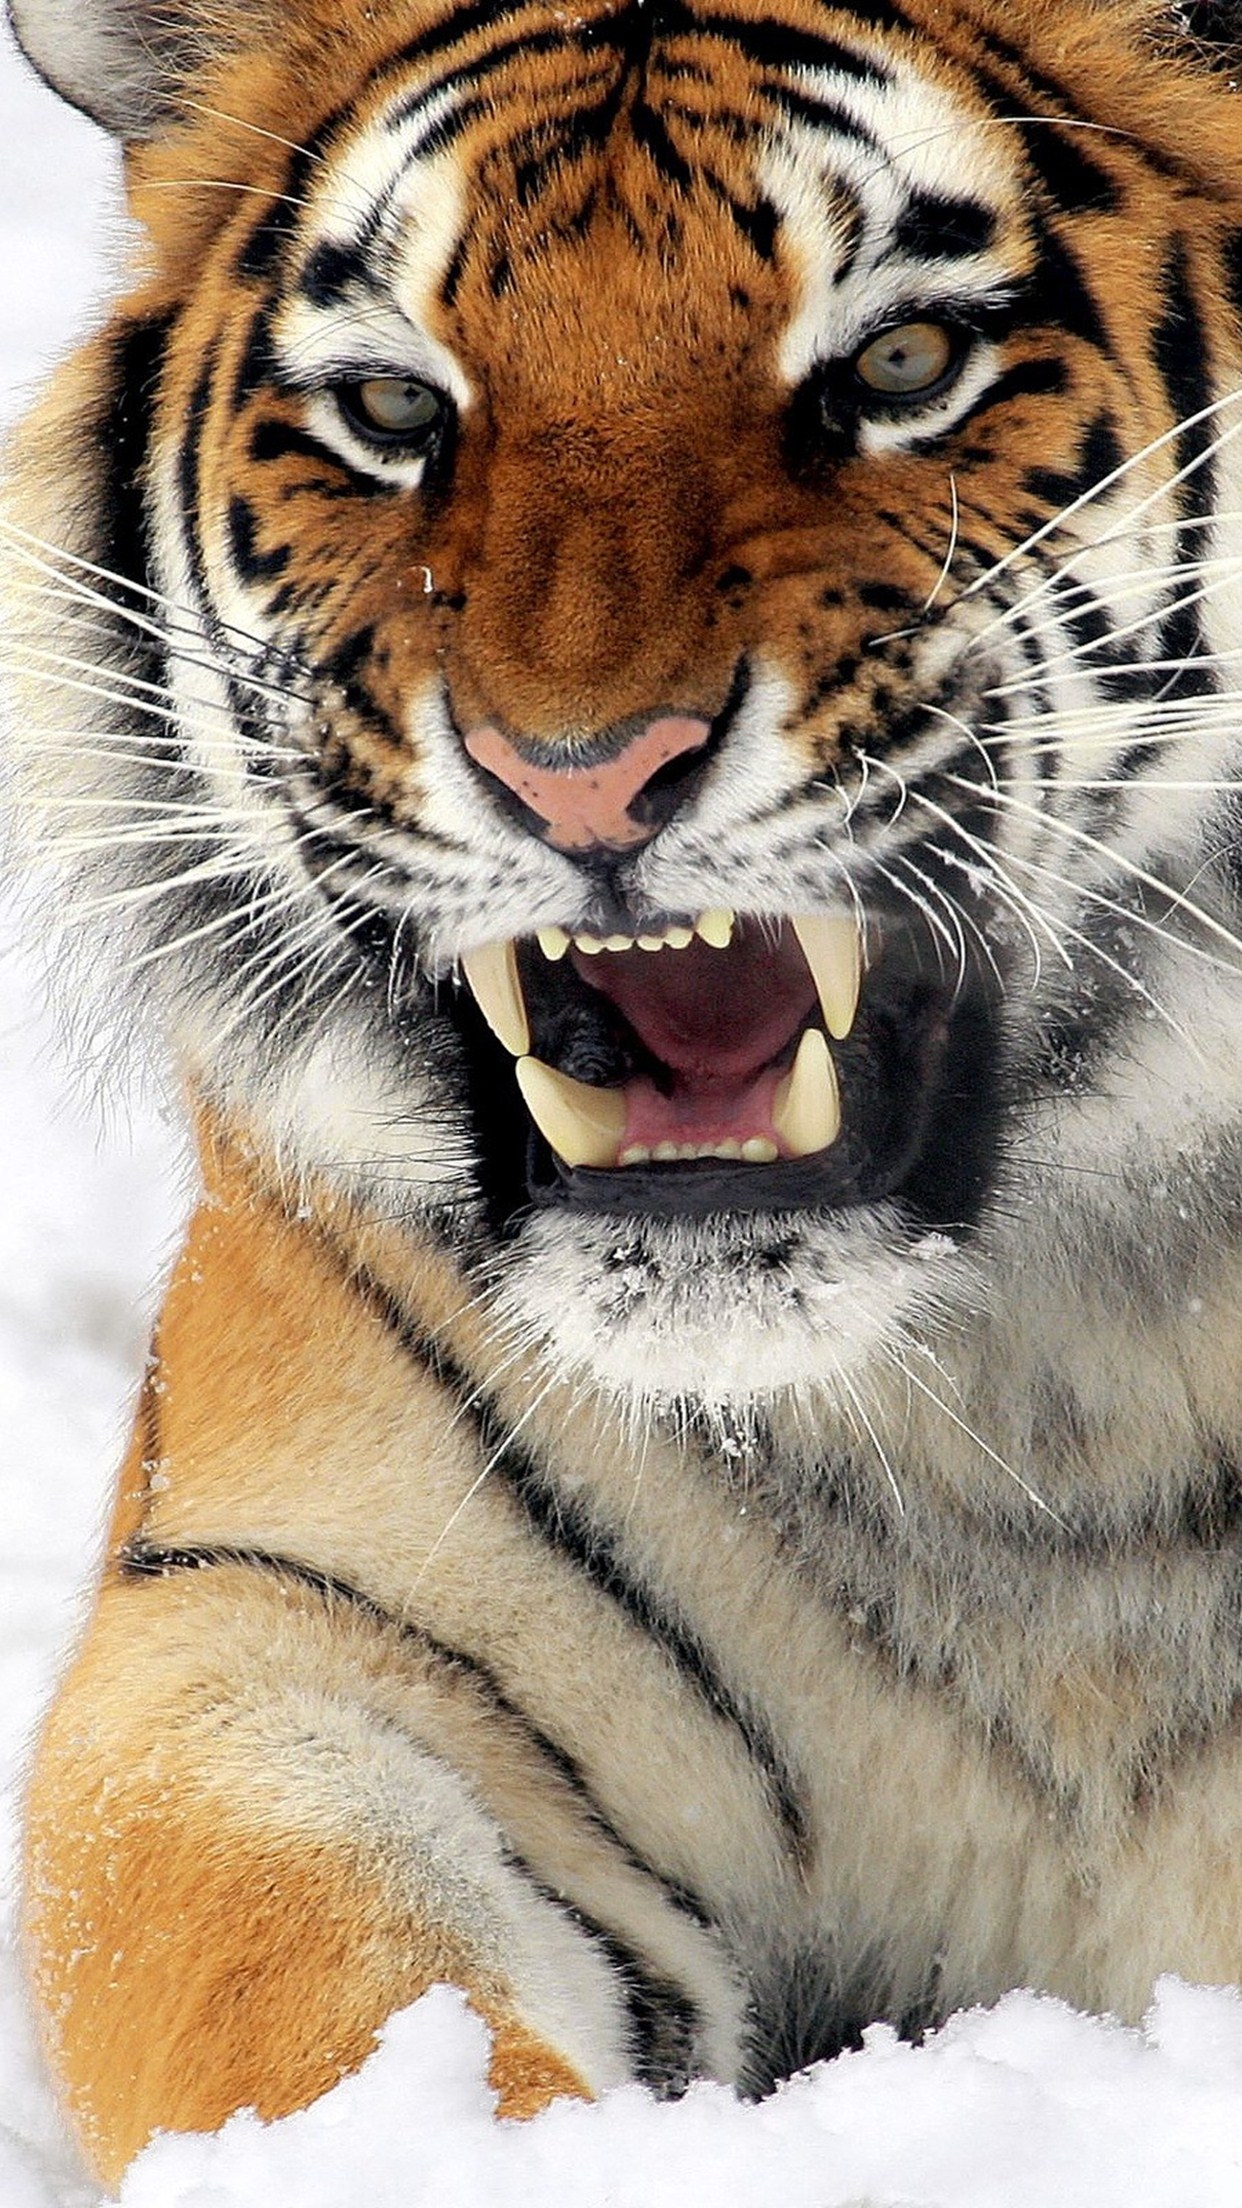 Tiger 3D Iphone Wallpapers